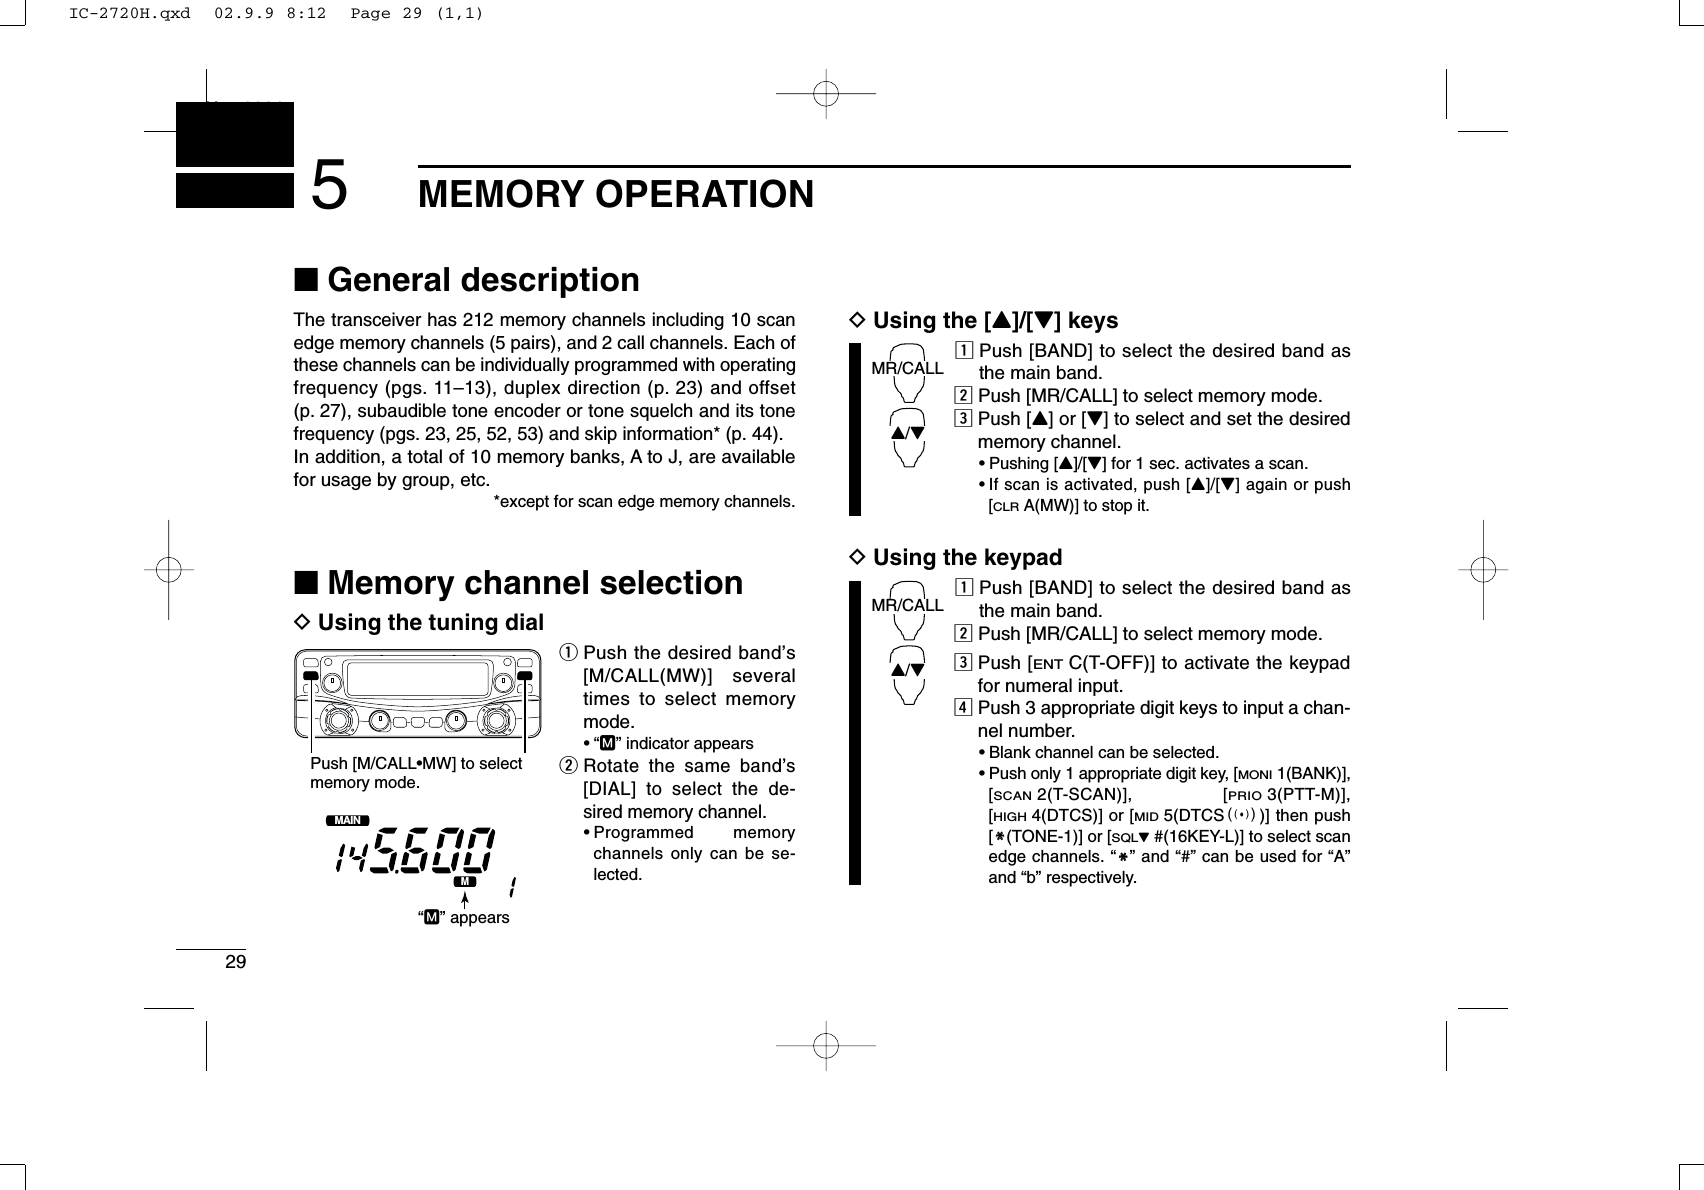 29MEMORY OPERATIONNew20015■General descriptionThe transceiver has 212 memory channels including 10 scanedge memory channels (5 pairs), and 2 call channels. Each ofthese channels can be individually programmed with operatingfrequency (pgs. 11–13), duplex direction (p. 23) and offset(p. 27), subaudible tone encoder or tone squelch and its tonefrequency (pgs. 23, 25, 52, 53) and skip information* (p. 44). In addition, a total of 10 memory banks, A to J, are availablefor usage by group, etc.*except for scan edge memory channels.■Memory channel selectionDUsing the tuning dialqPush the desired band’s[M/CALL(MW)] severaltimes to select memorymode.•“M” indicator appearswRotate the same band’s[DIAL] to select the de-sired memory channel.•Programmed memorychannels only can be se-lected.DUsing the [Y]/[Z] keyszPush [BAND] to select the desired band asthe main band.xPush [MR/CALL] to select memory mode.cPush [Y] or [Z] to select and set the desiredmemory channel.•Pushing [Y]/[Z] for 1 sec. activates a scan.•If scan is activated, push [Y]/[Z] again or push[CLRA(MW)] to stop it.DUsing the keypadzPush [BAND] to select the desired band asthe main band.xPush [MR/CALL] to select memory mode.cPush [ENTC(T-OFF)] to activate the keypadfor numeral input.vPush 3 appropriate digit keys to input a chan-nel number. •Blank channel can be selected.•Push only 1 appropriate digit key, [MONI1(BANK)],[SCAN2(T-SCAN)], [PRIO3(PTT-M)],[HIGH4(DTCS)] or [MID5(DTCSS)] then push[MM(TONE-1)] or [SQLZ#(16KEY-L)] to select scanedge channels. “MM” and “#” can be used for “A”and “b” respectively.MR/CALLY/ZMR/CALLY/ZMAINT  XMPush [M/CALL•MW] to selectmemory mode.“M” appearsIC-2720H.qxd  02.9.9 8:12  Page 29 (1,1)